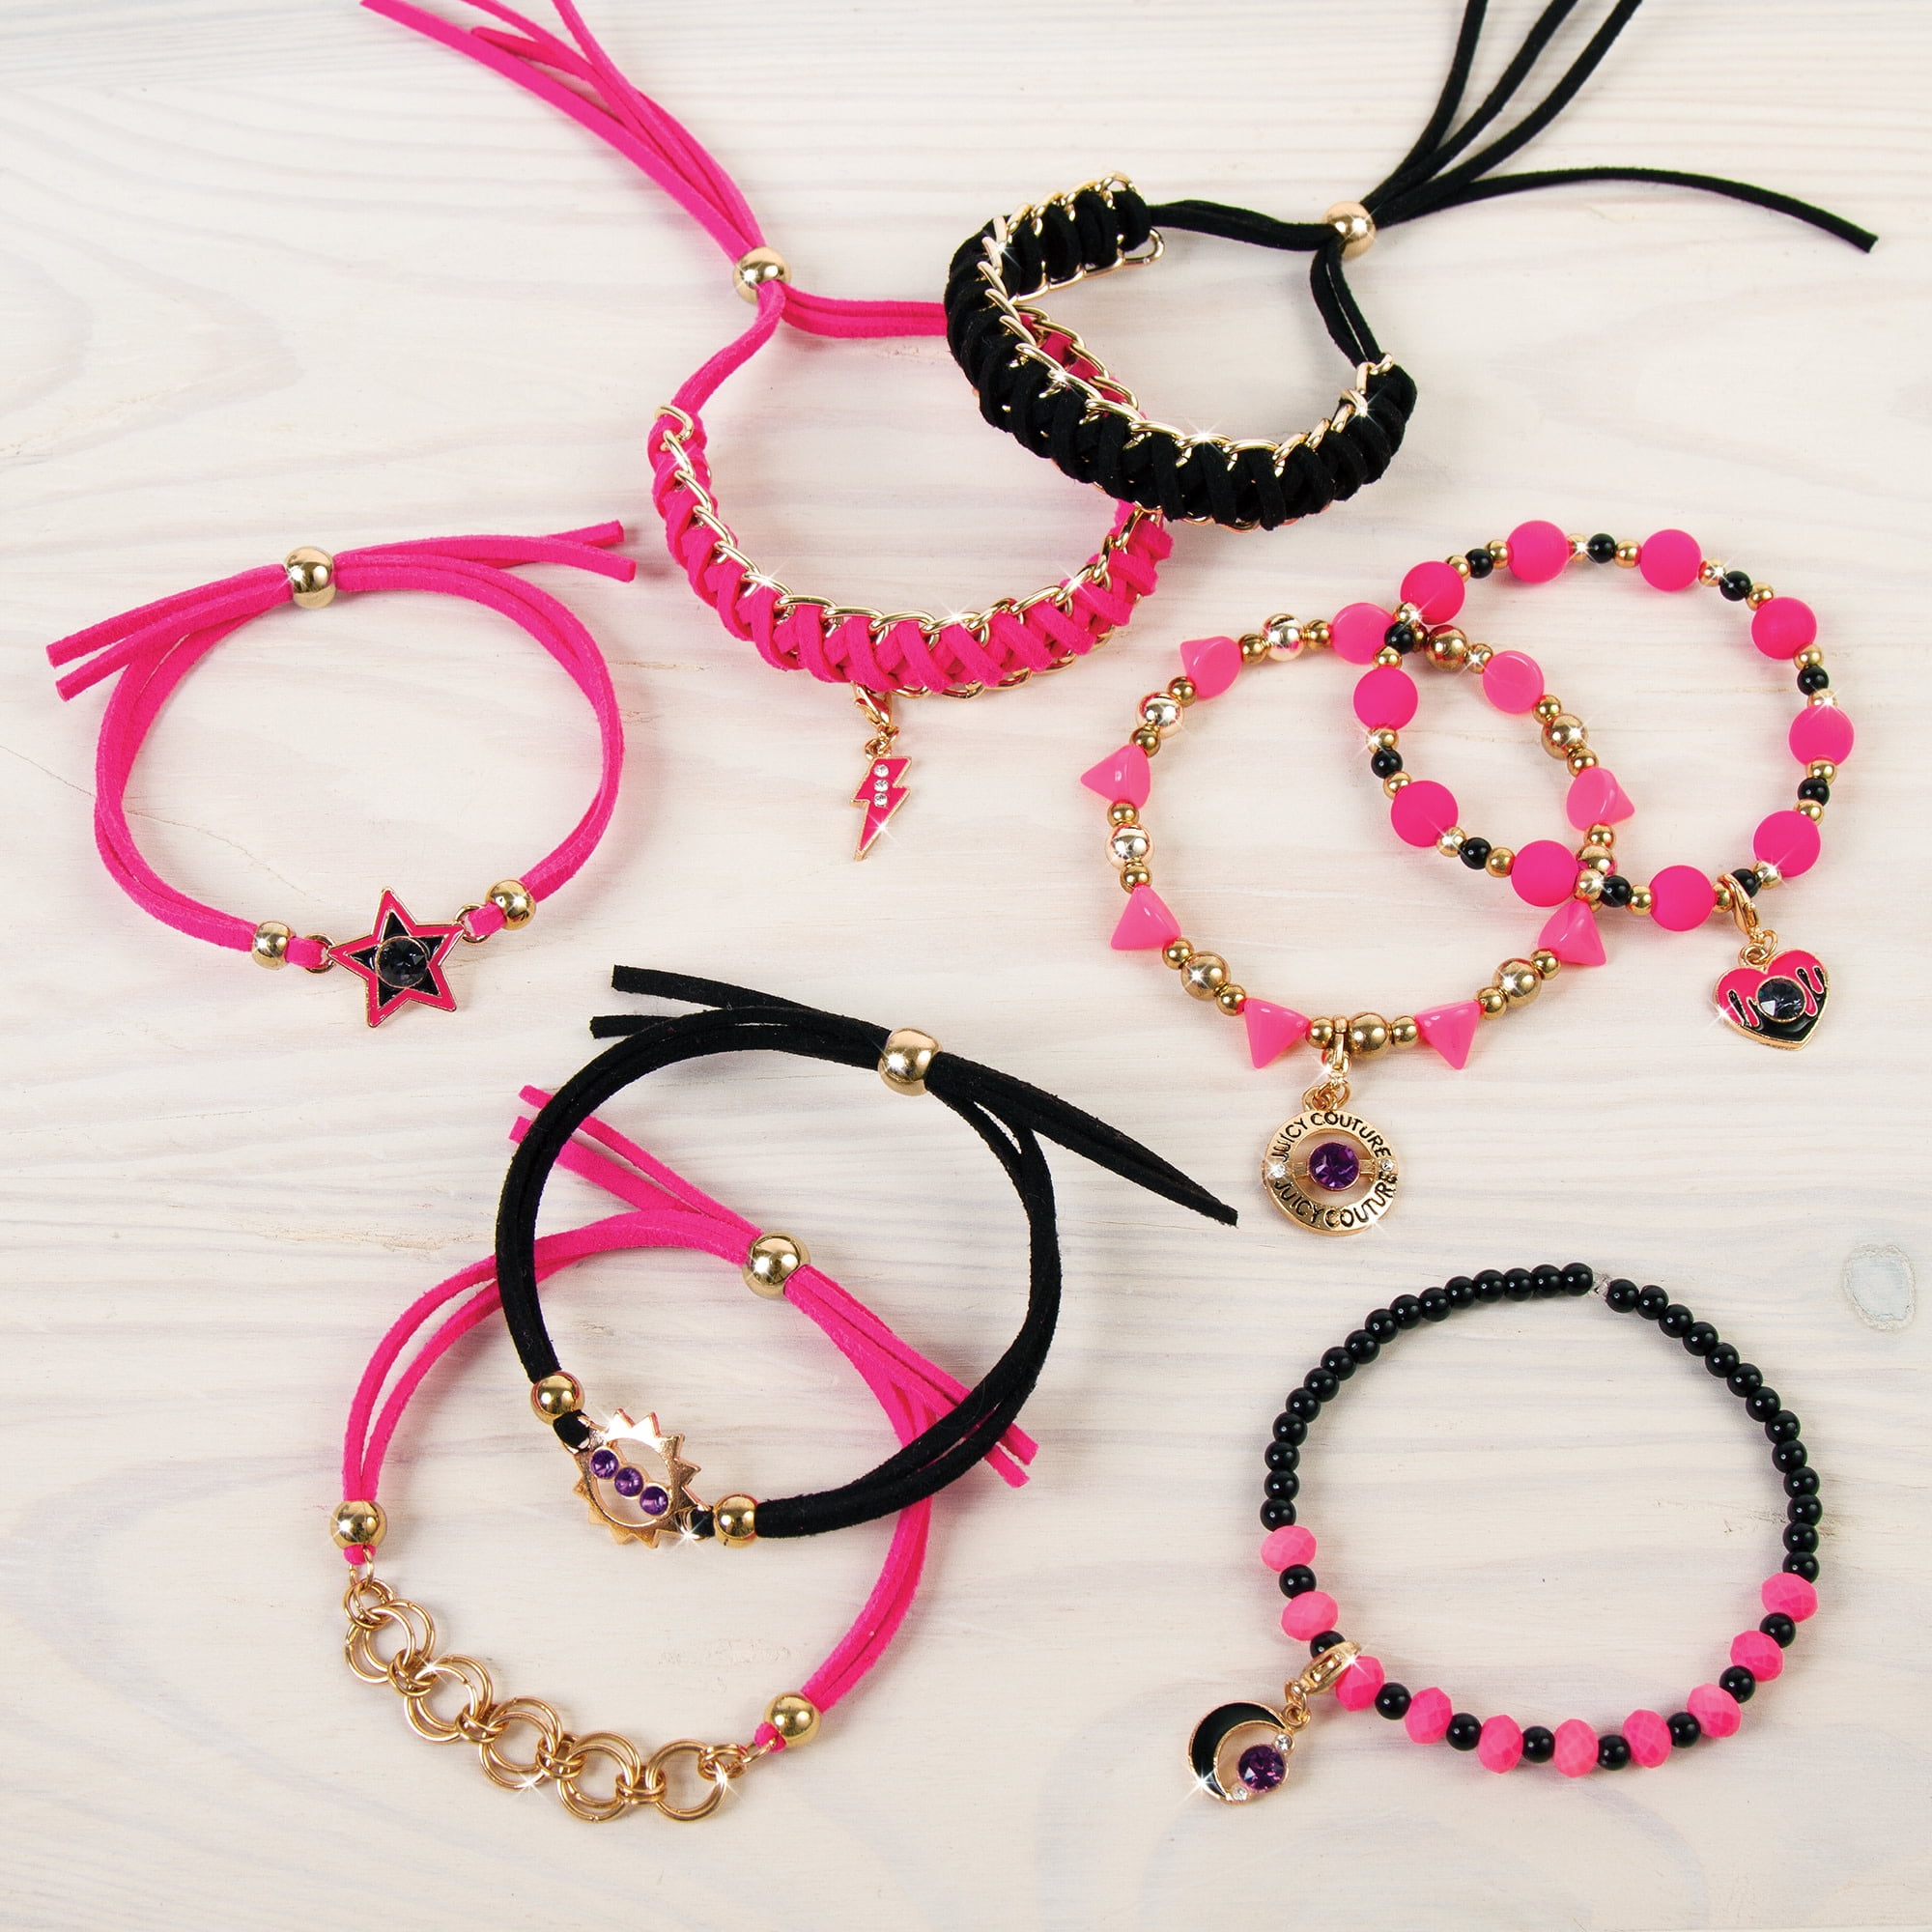 Make It Real™ Juicy Couture DIY Chains & Charms Kit